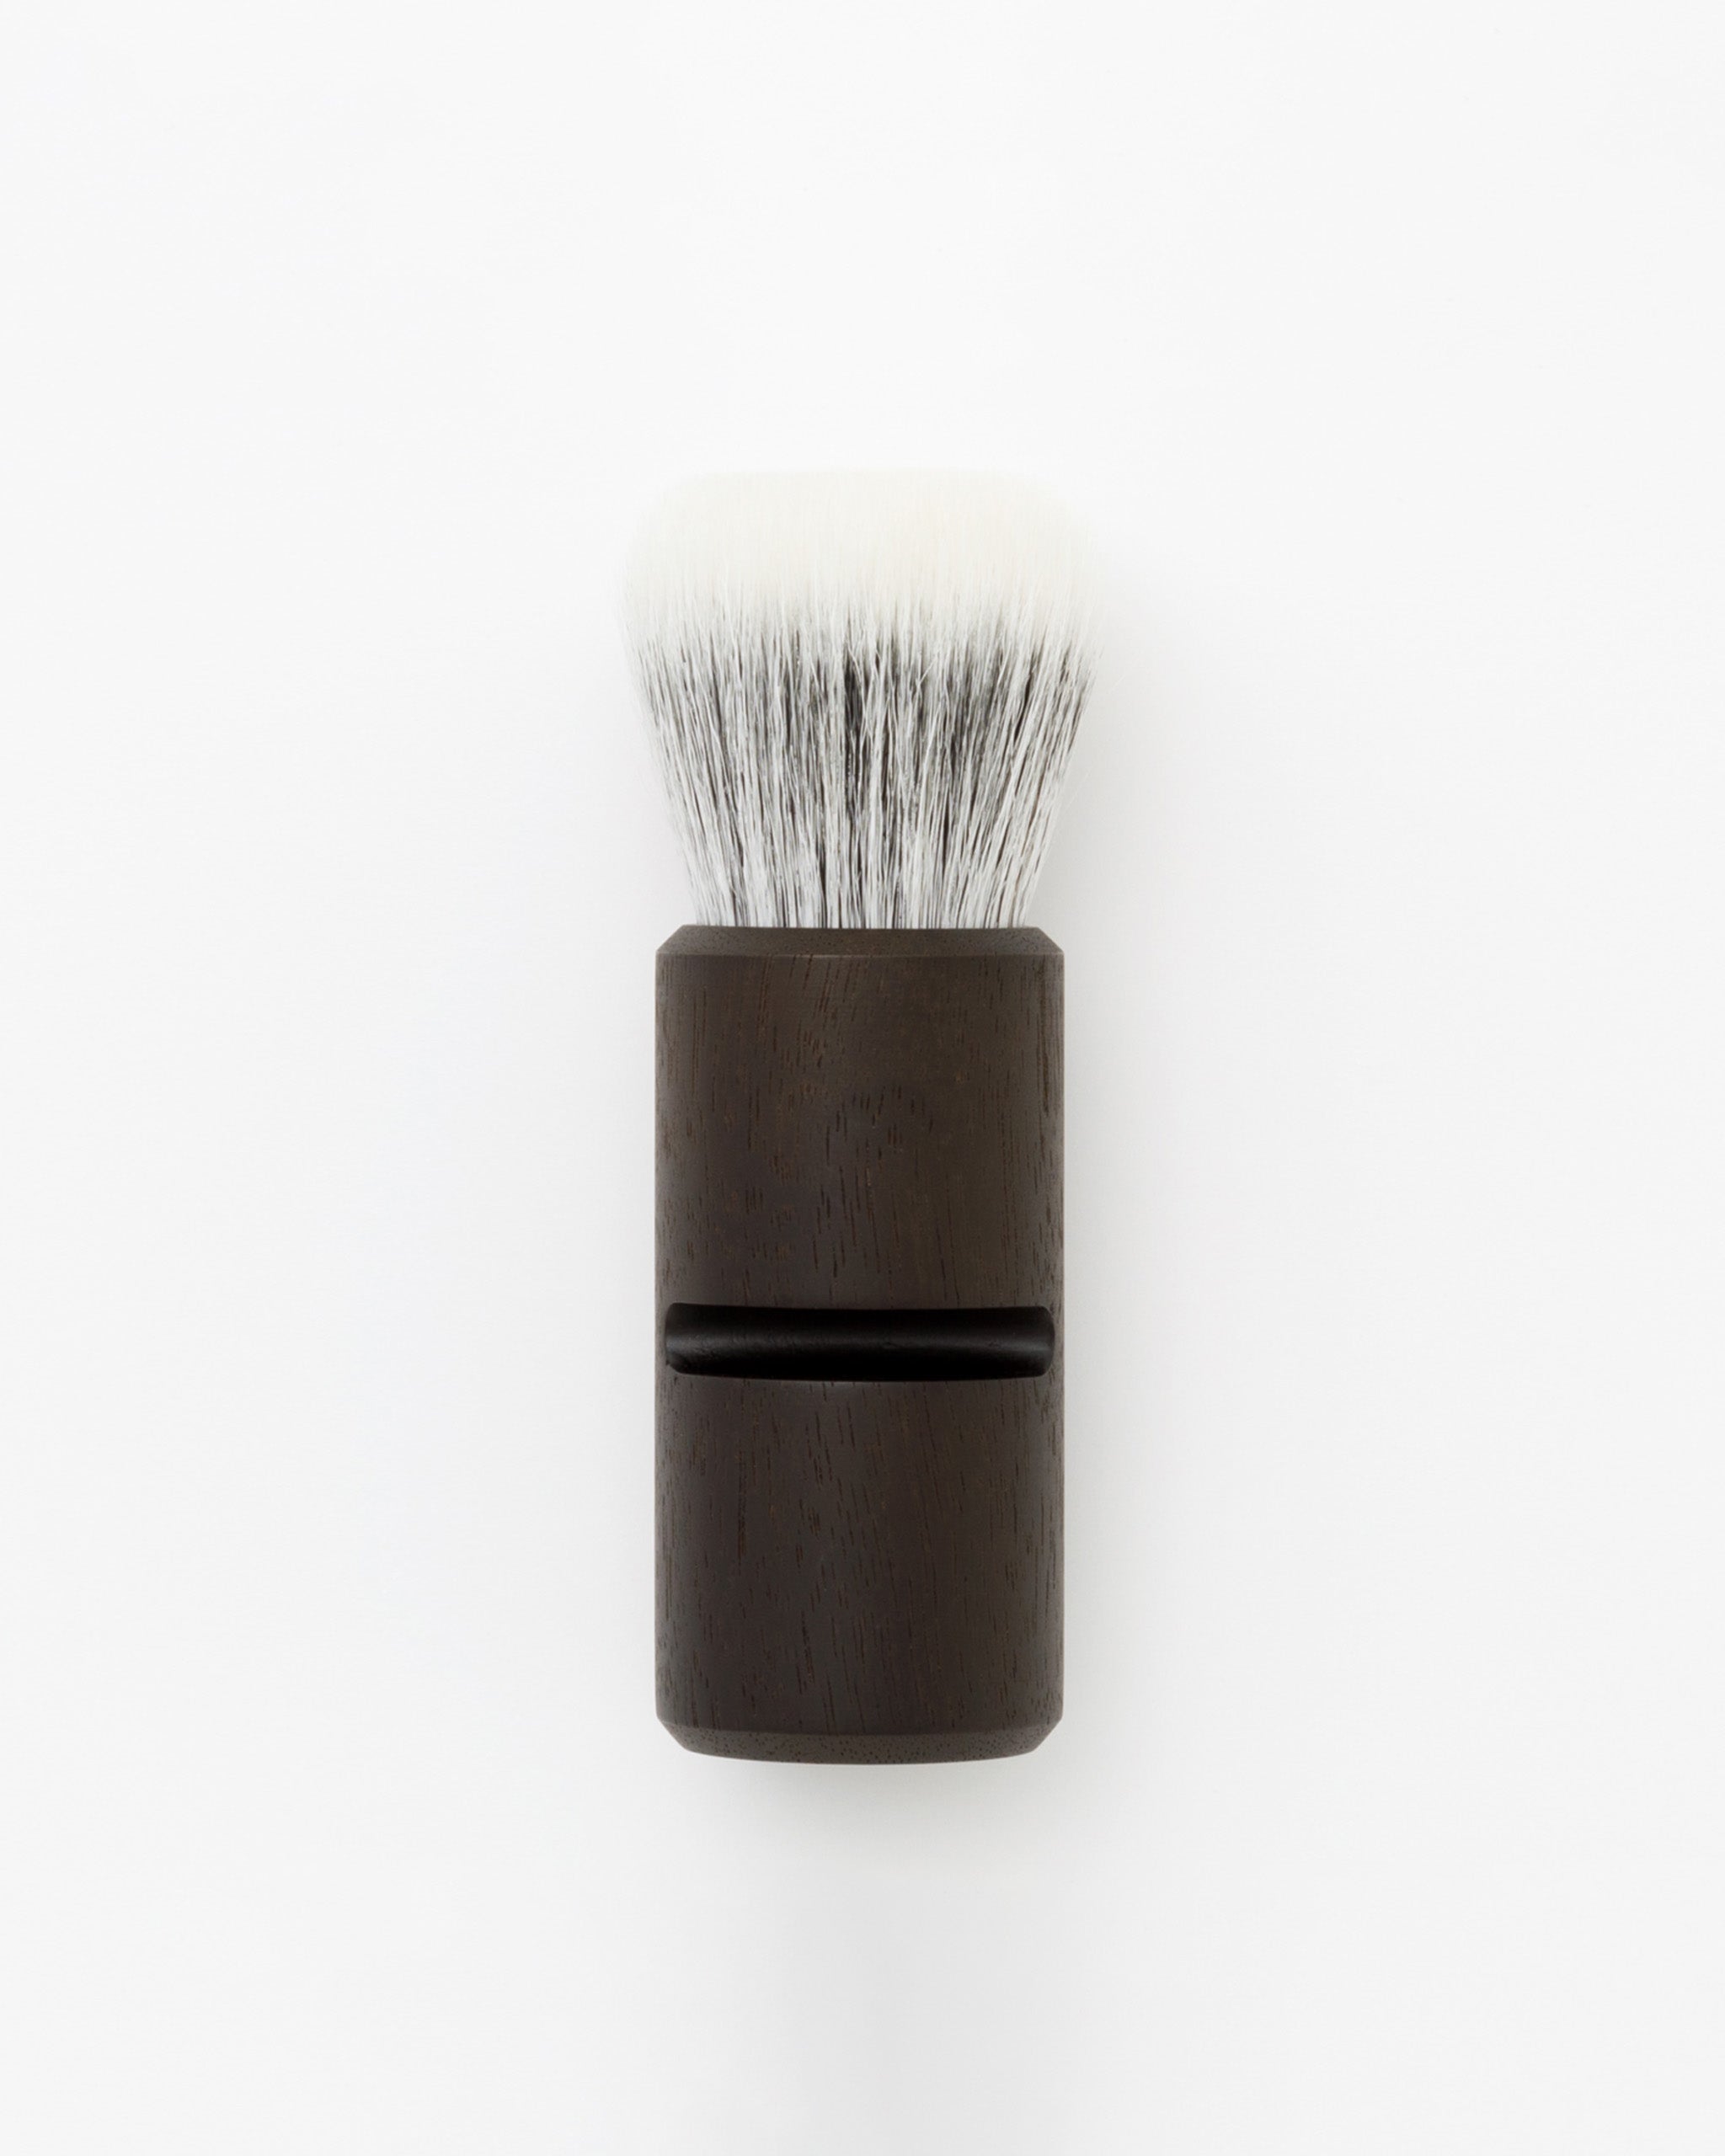  Silhouetted image of soft Jiva face cleansing and shaving series walnut, boar bristle, and goat hair brush by Shaquda against white-gray background.